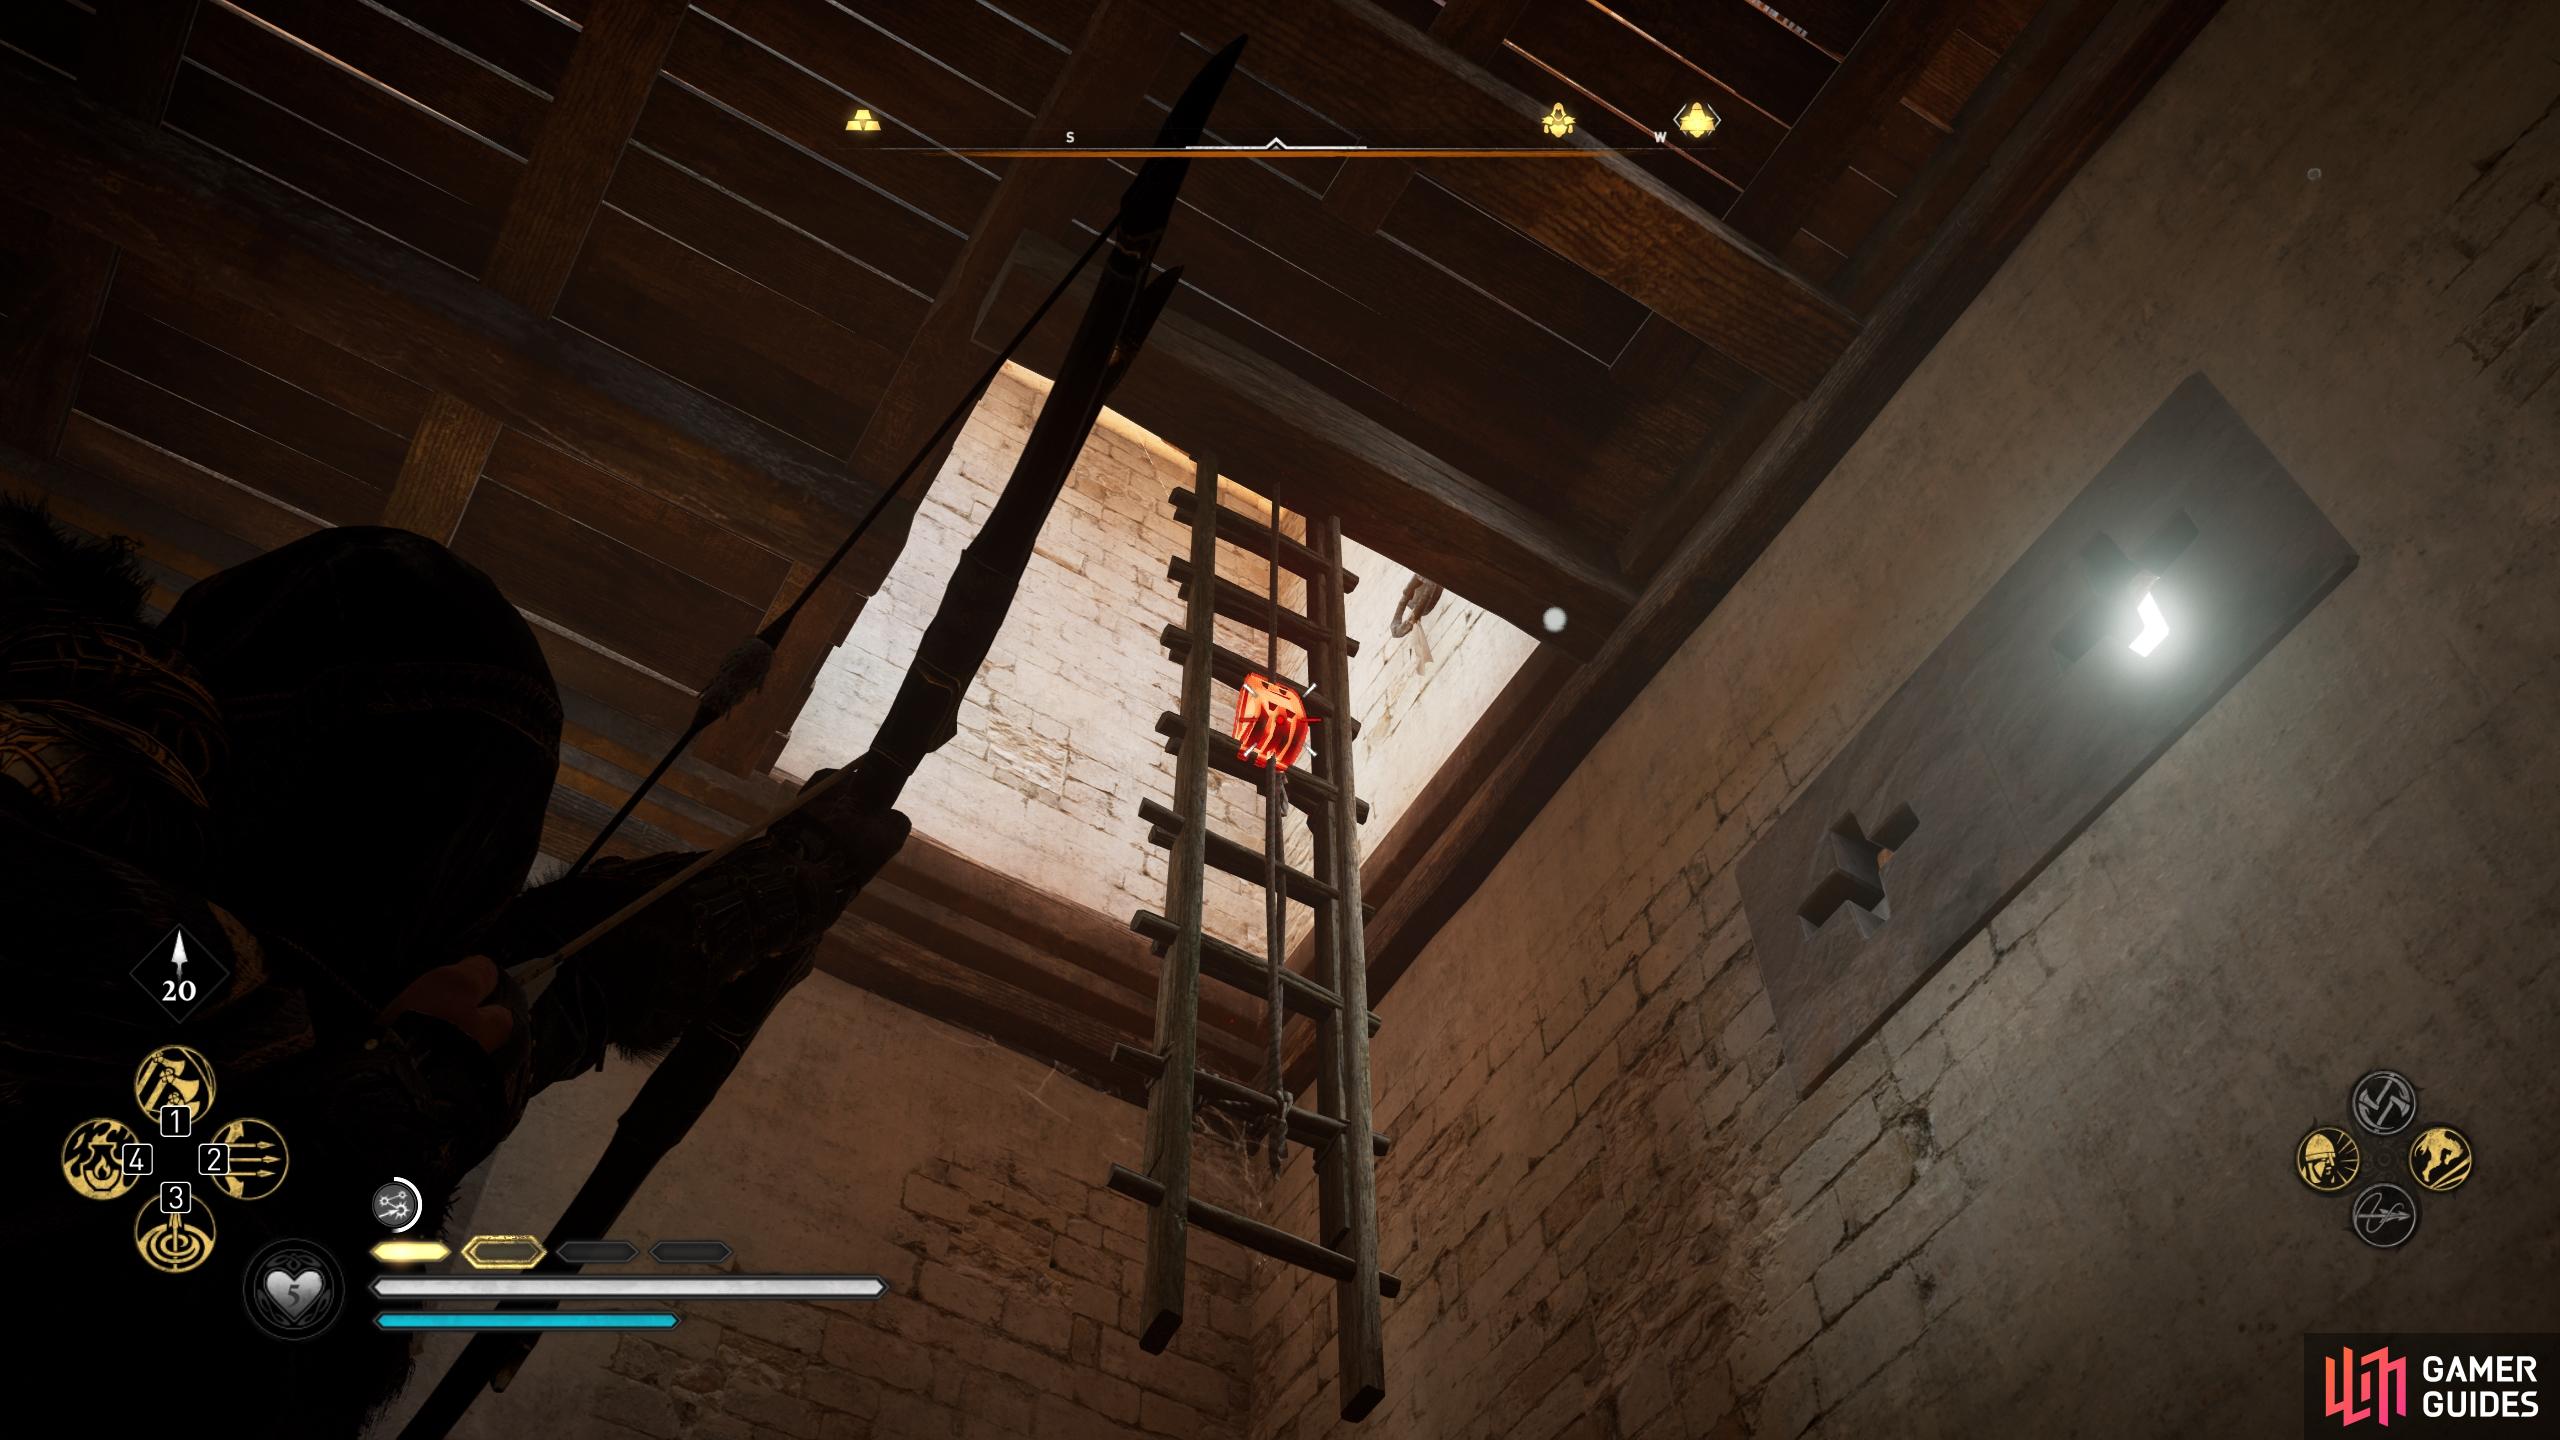 Shoot the link on the ladder to lower it.